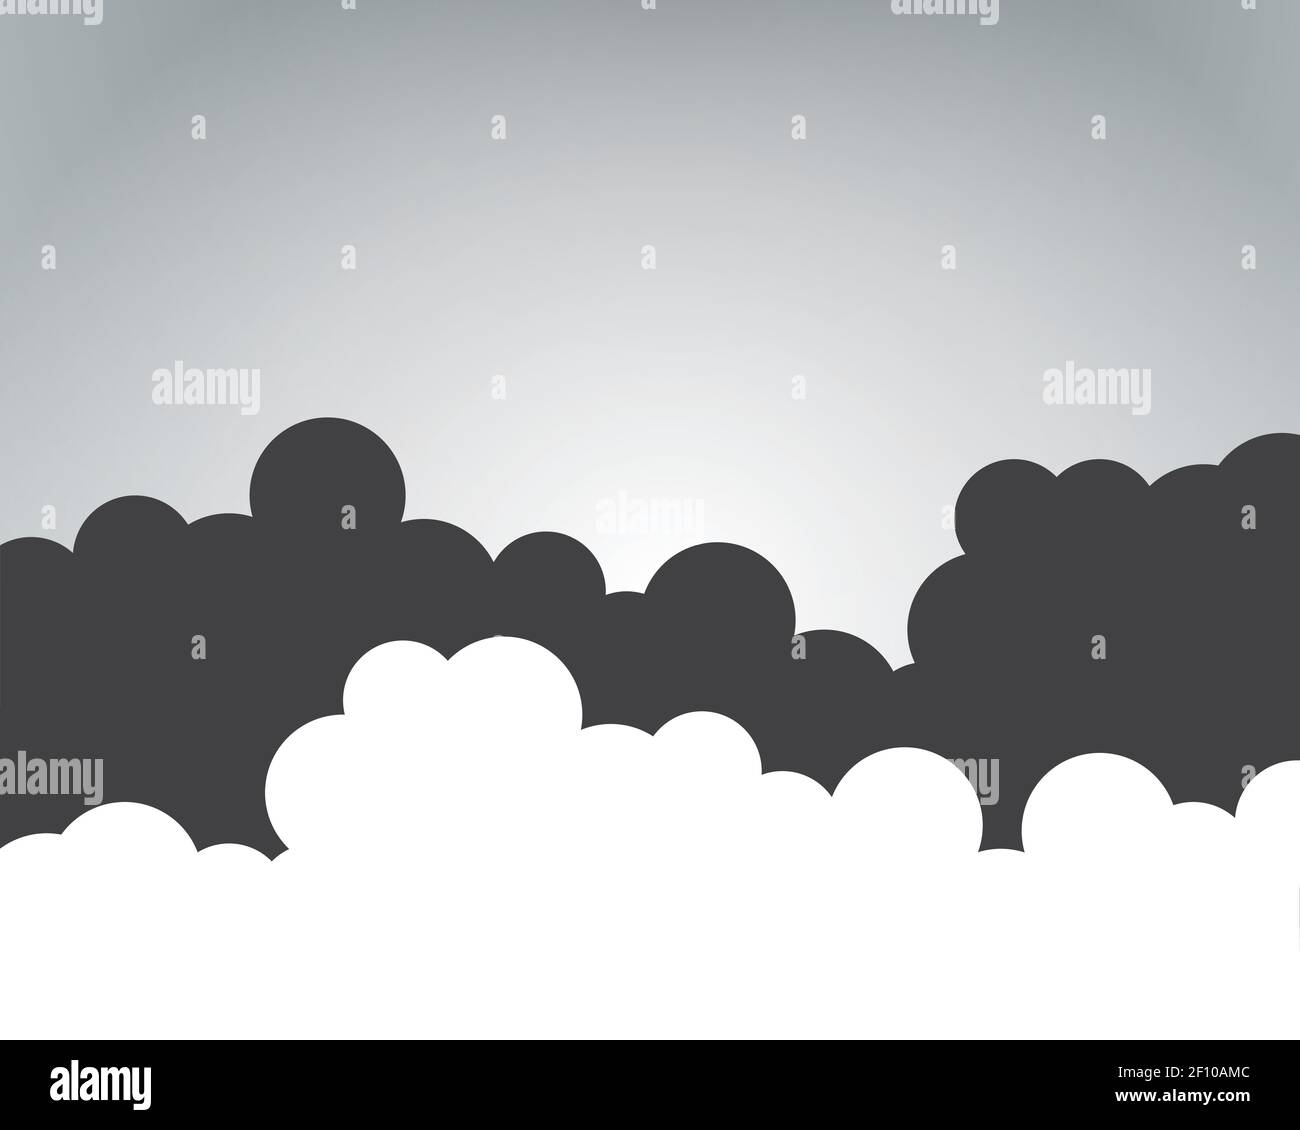 Blue sky with cloud vector icon illustration design Stock Vector